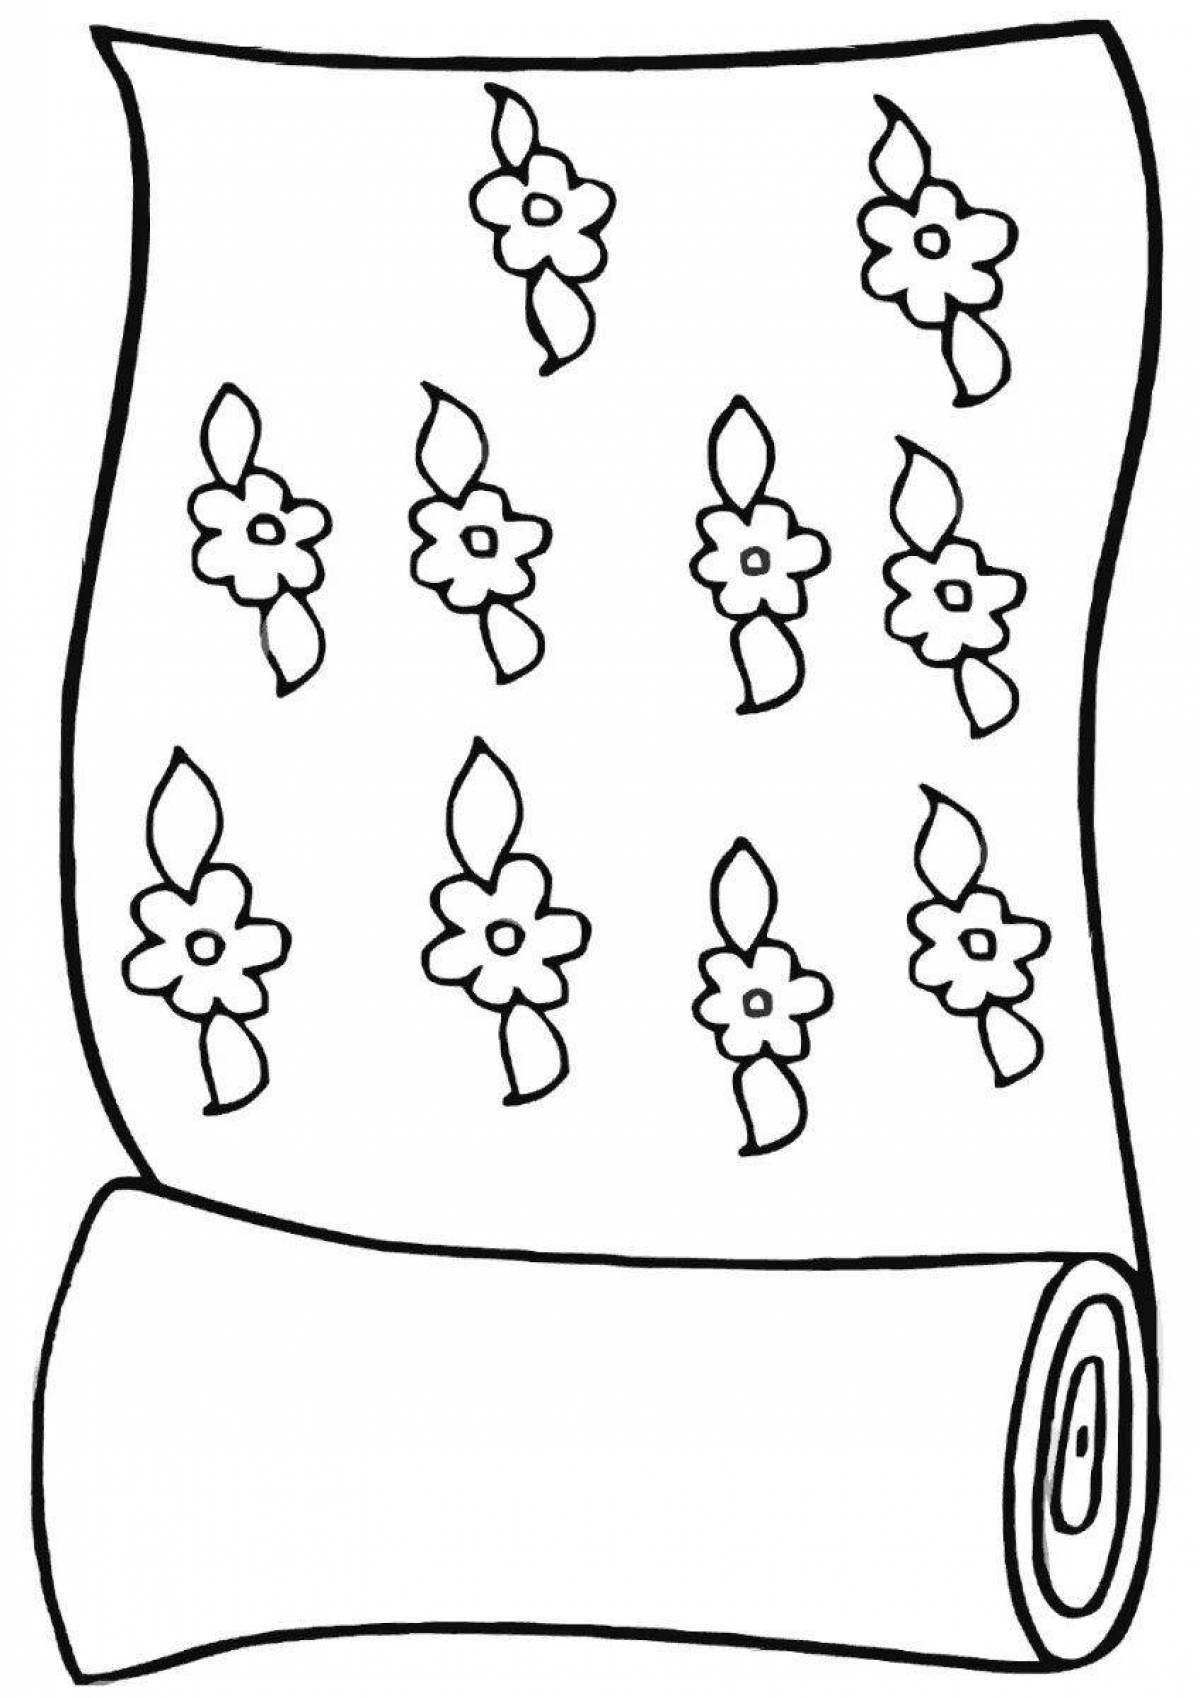 Detailed rug coloring page